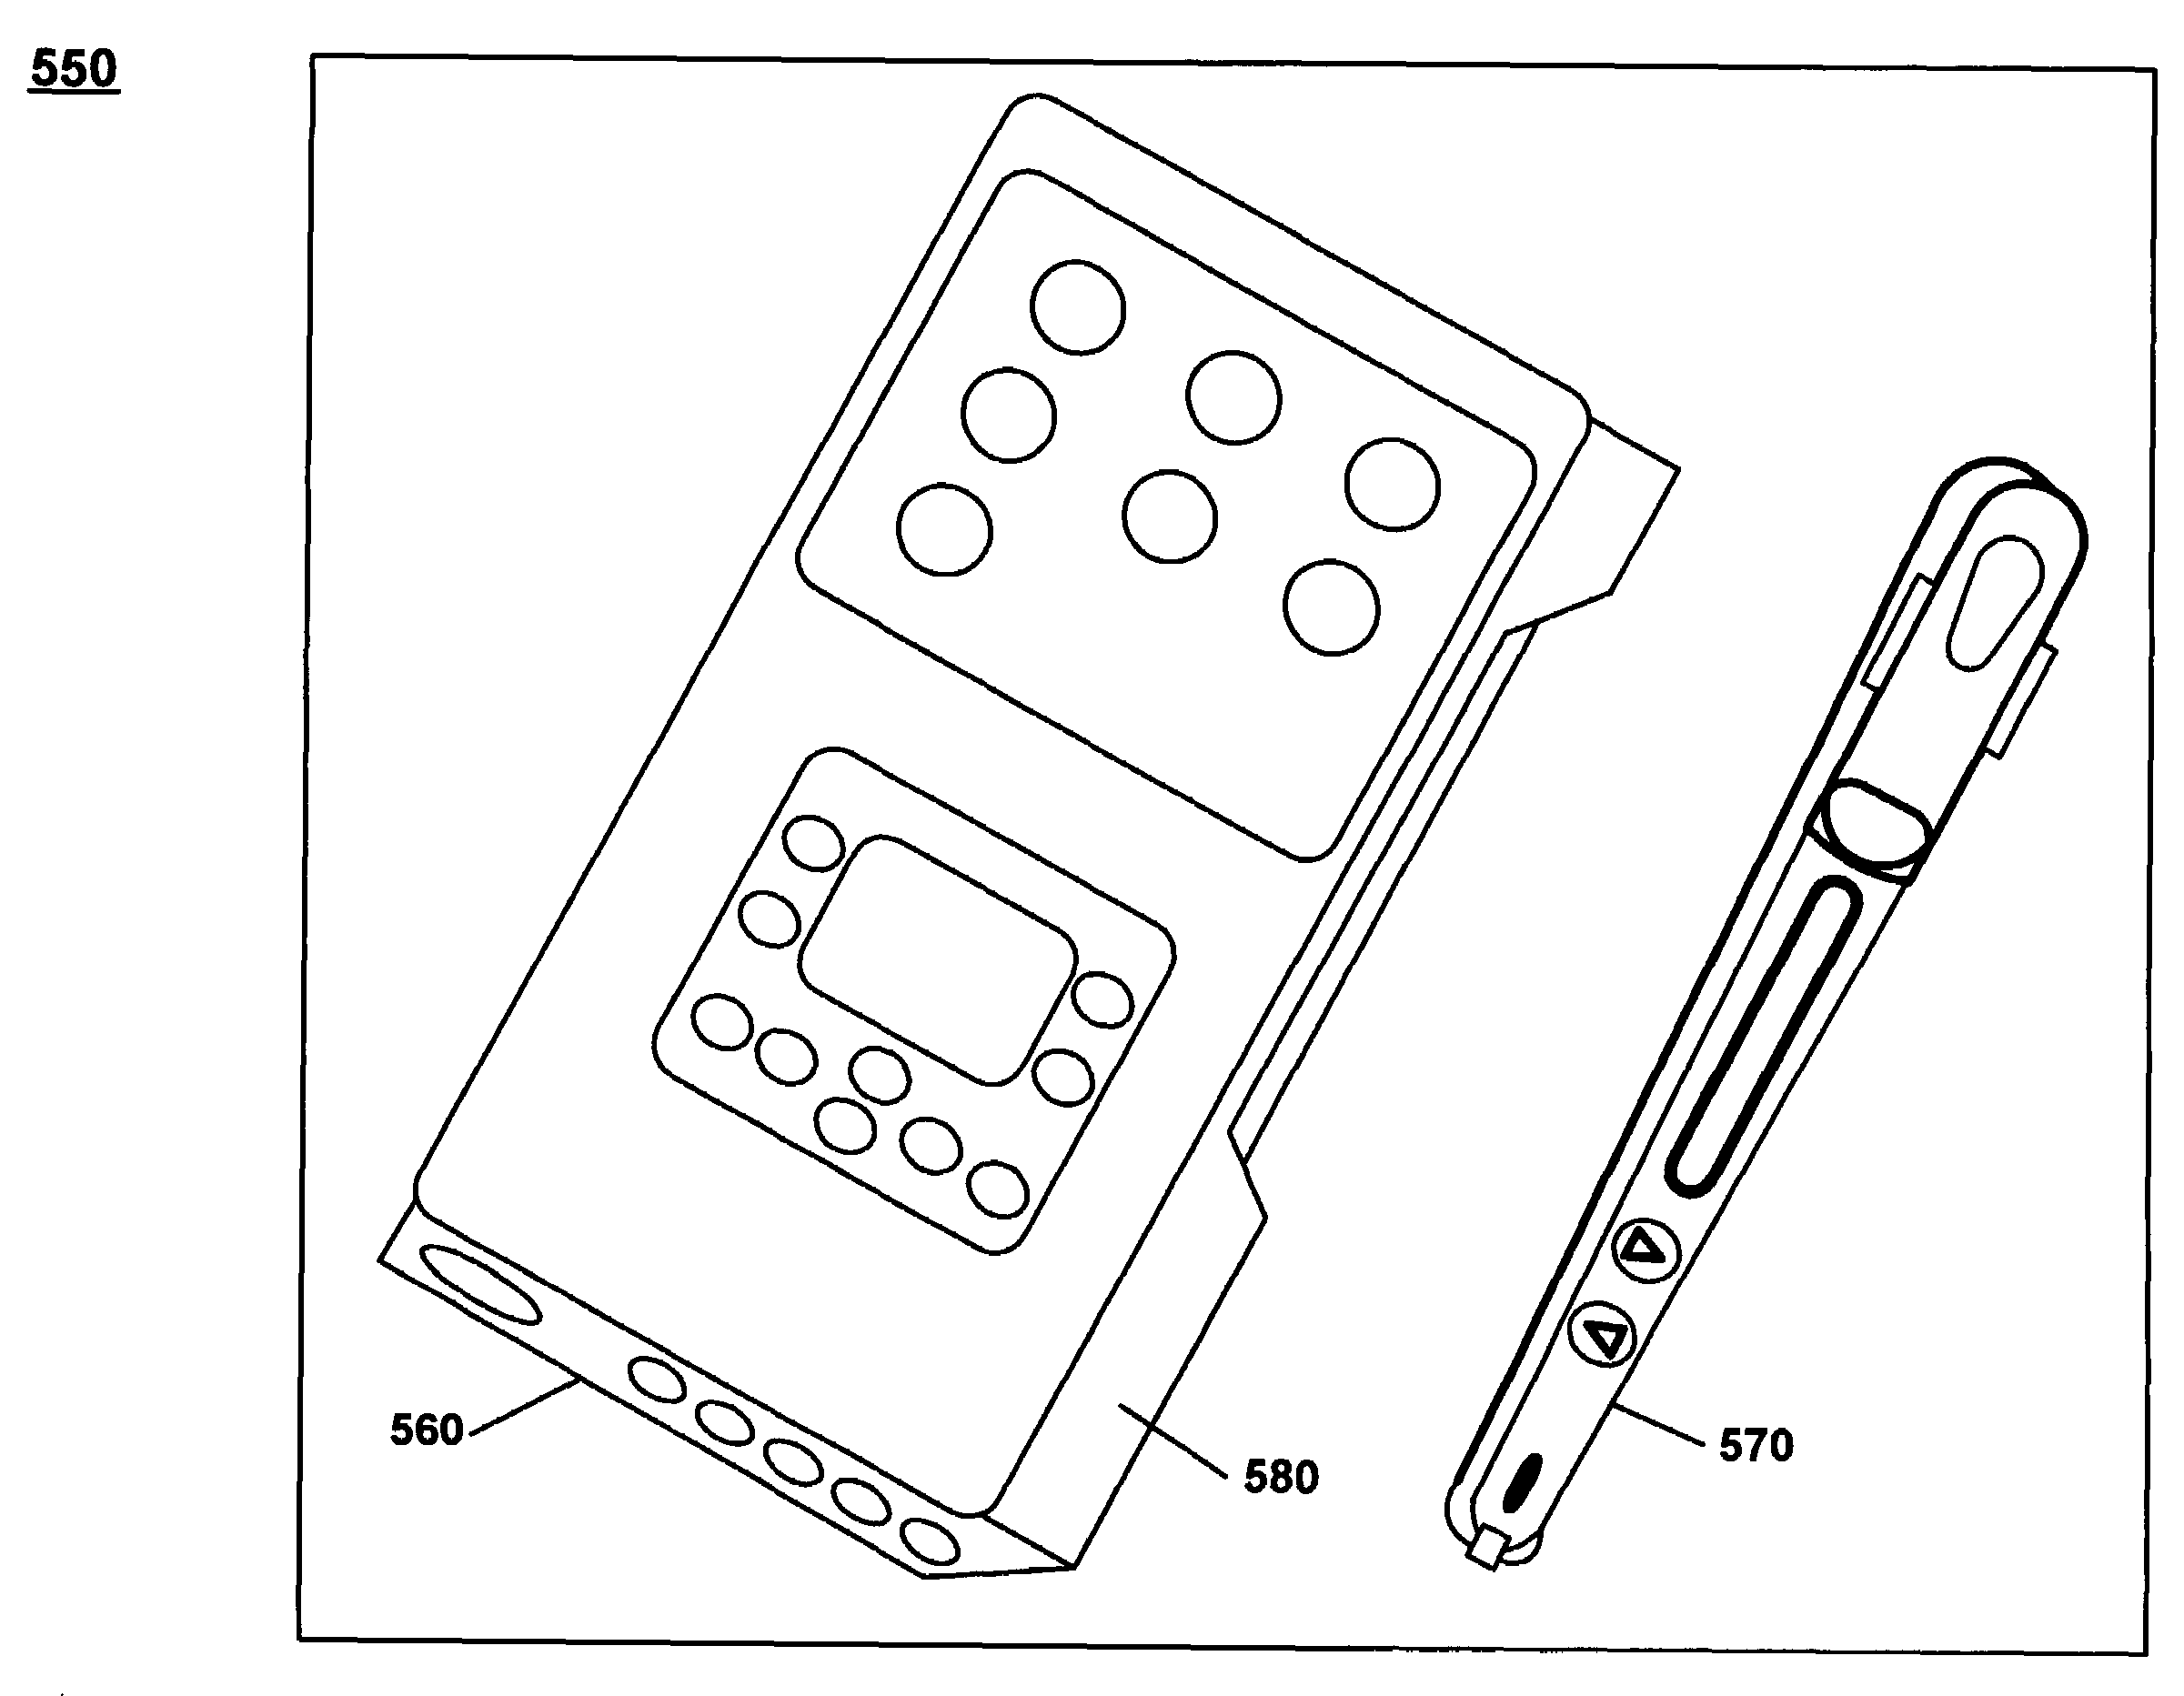 Compact removable voice handset for an integrated portable computer system/mobile phone